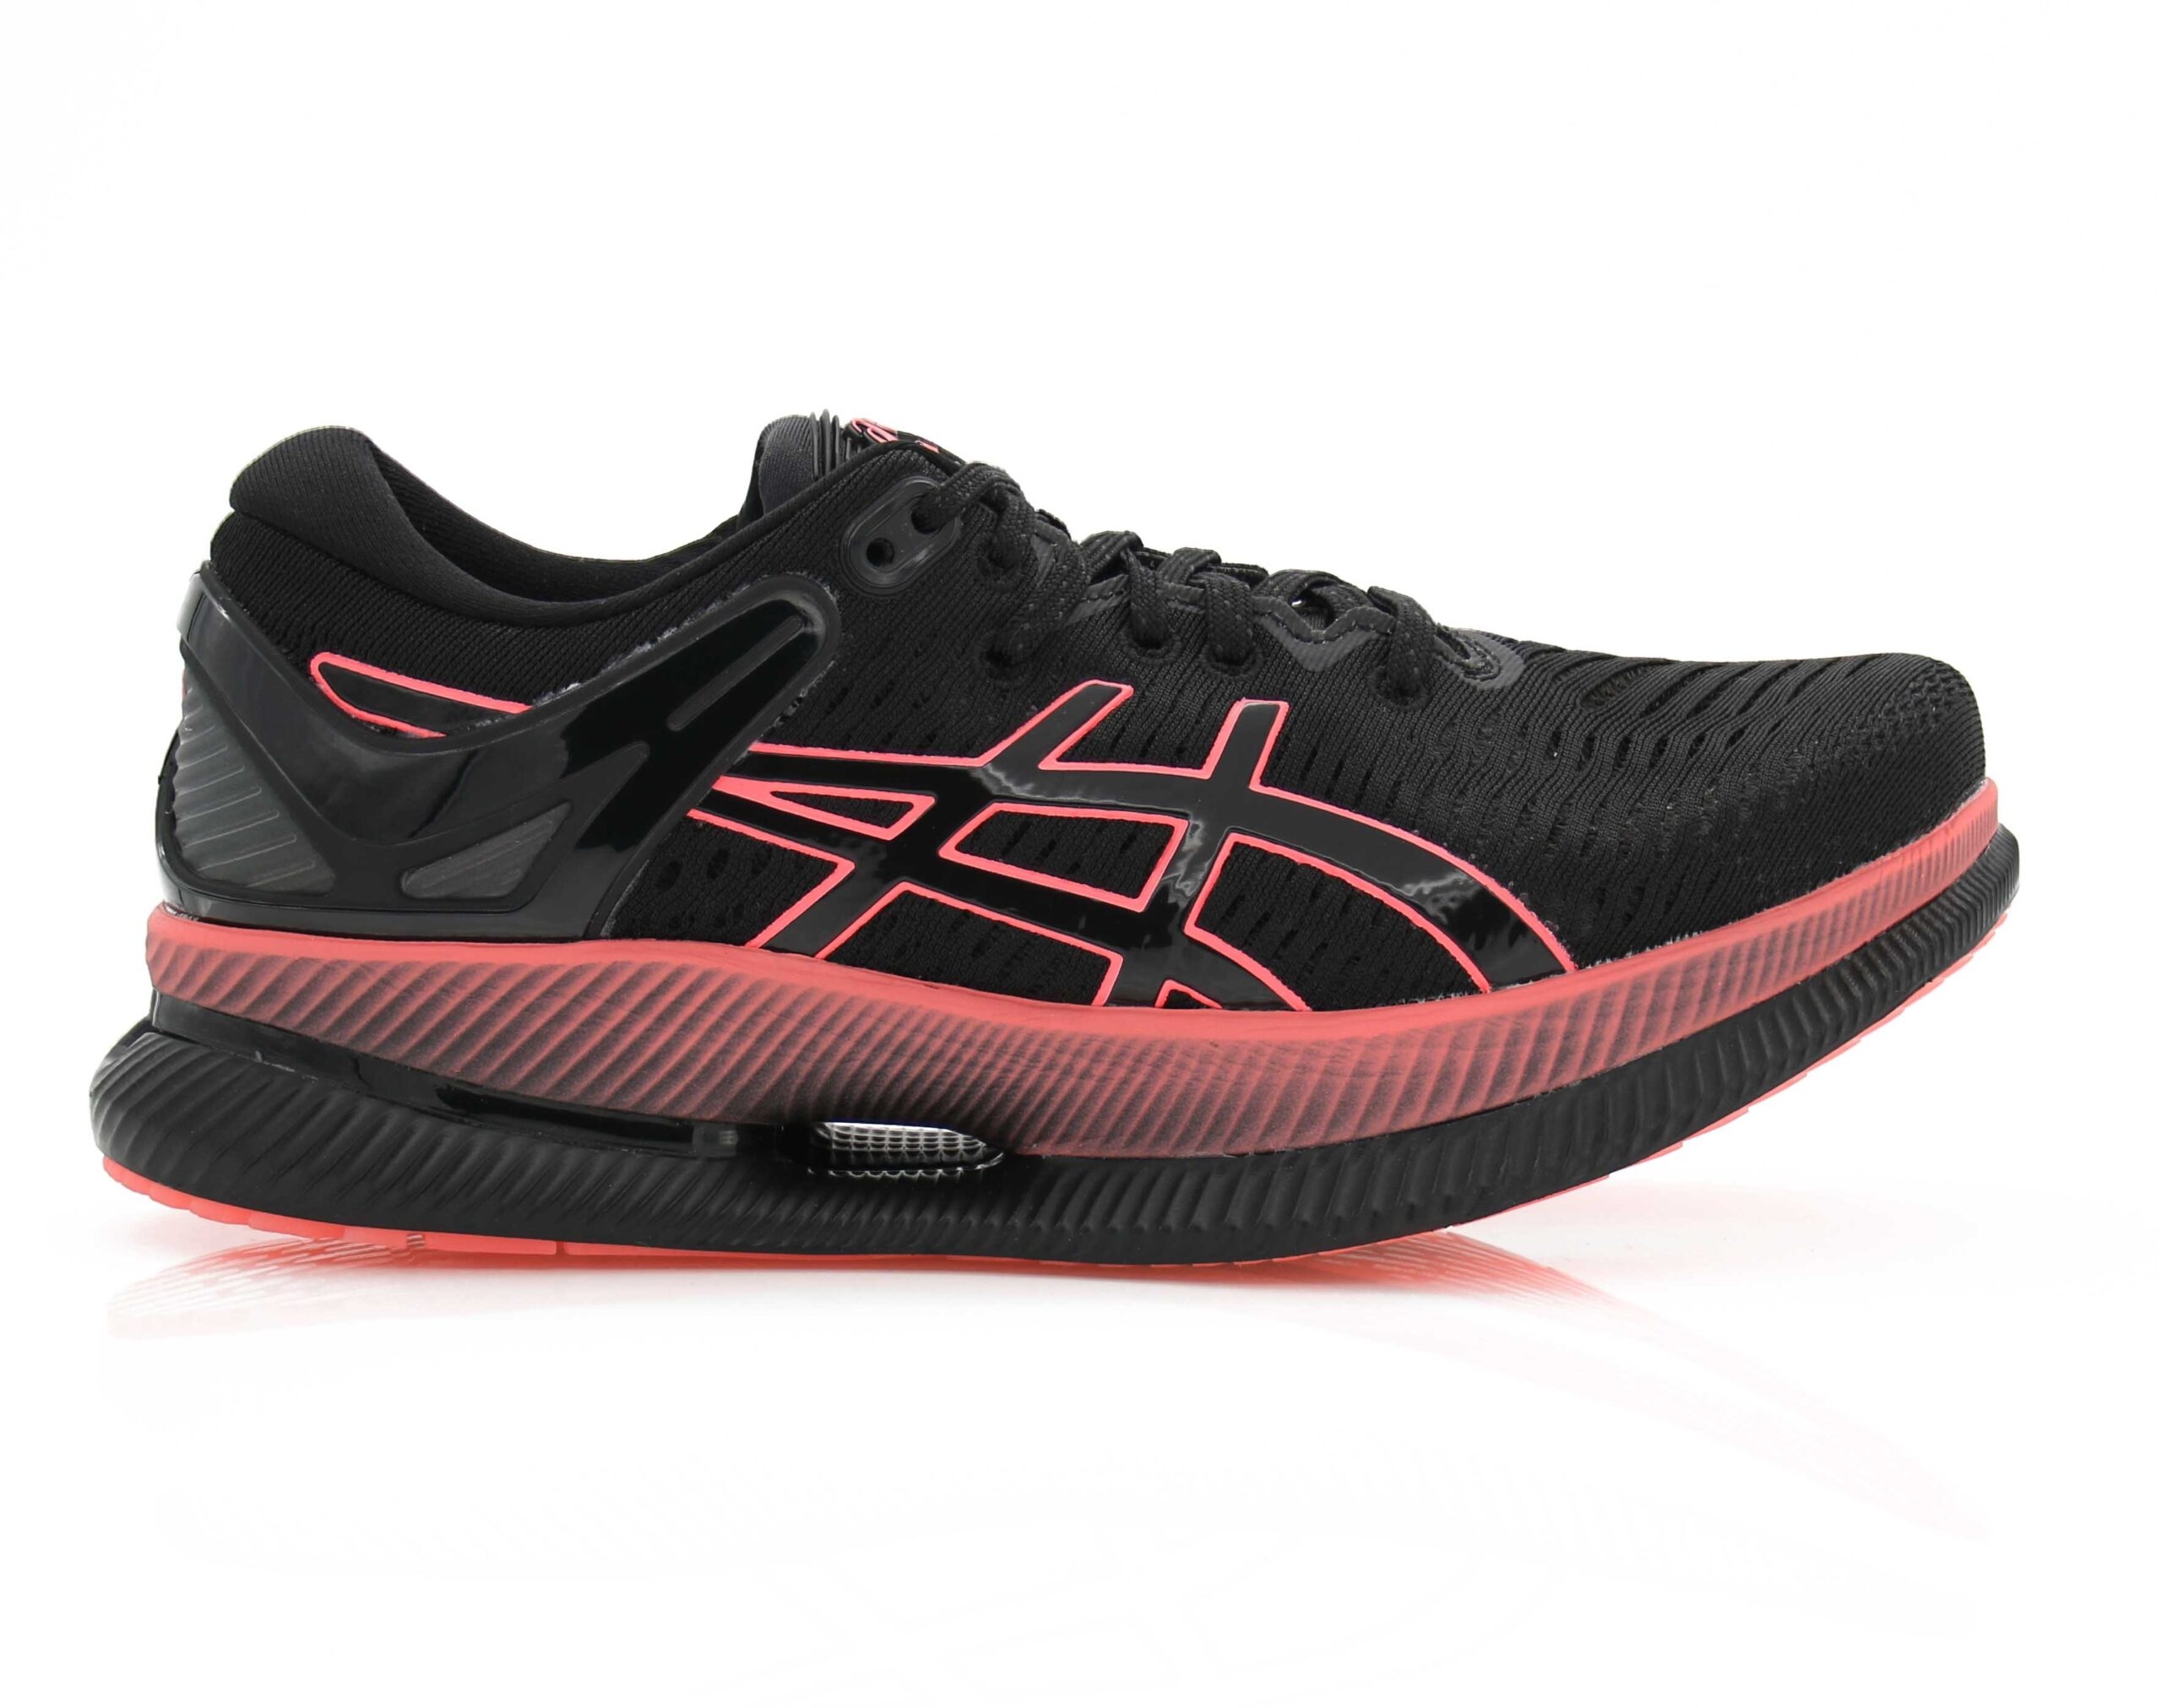 Womens Asics MetaRide – Running Trainers – Lace-Up – Suitable For Achilles Pain / Bunions – Size 7 – Black / Red – Synthetic Fabric